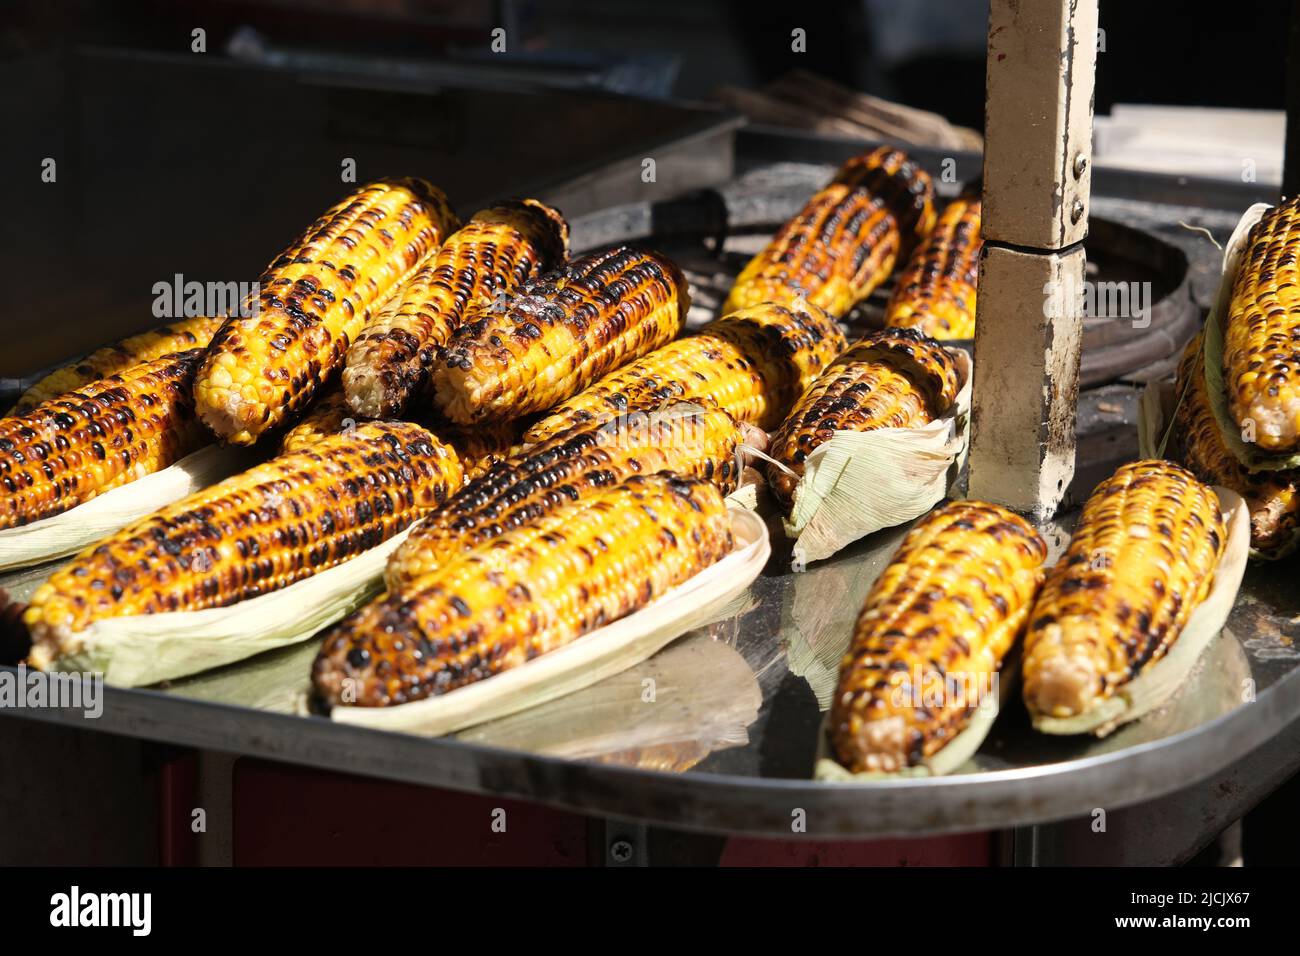 Grilled corn on the cob Stock Photo